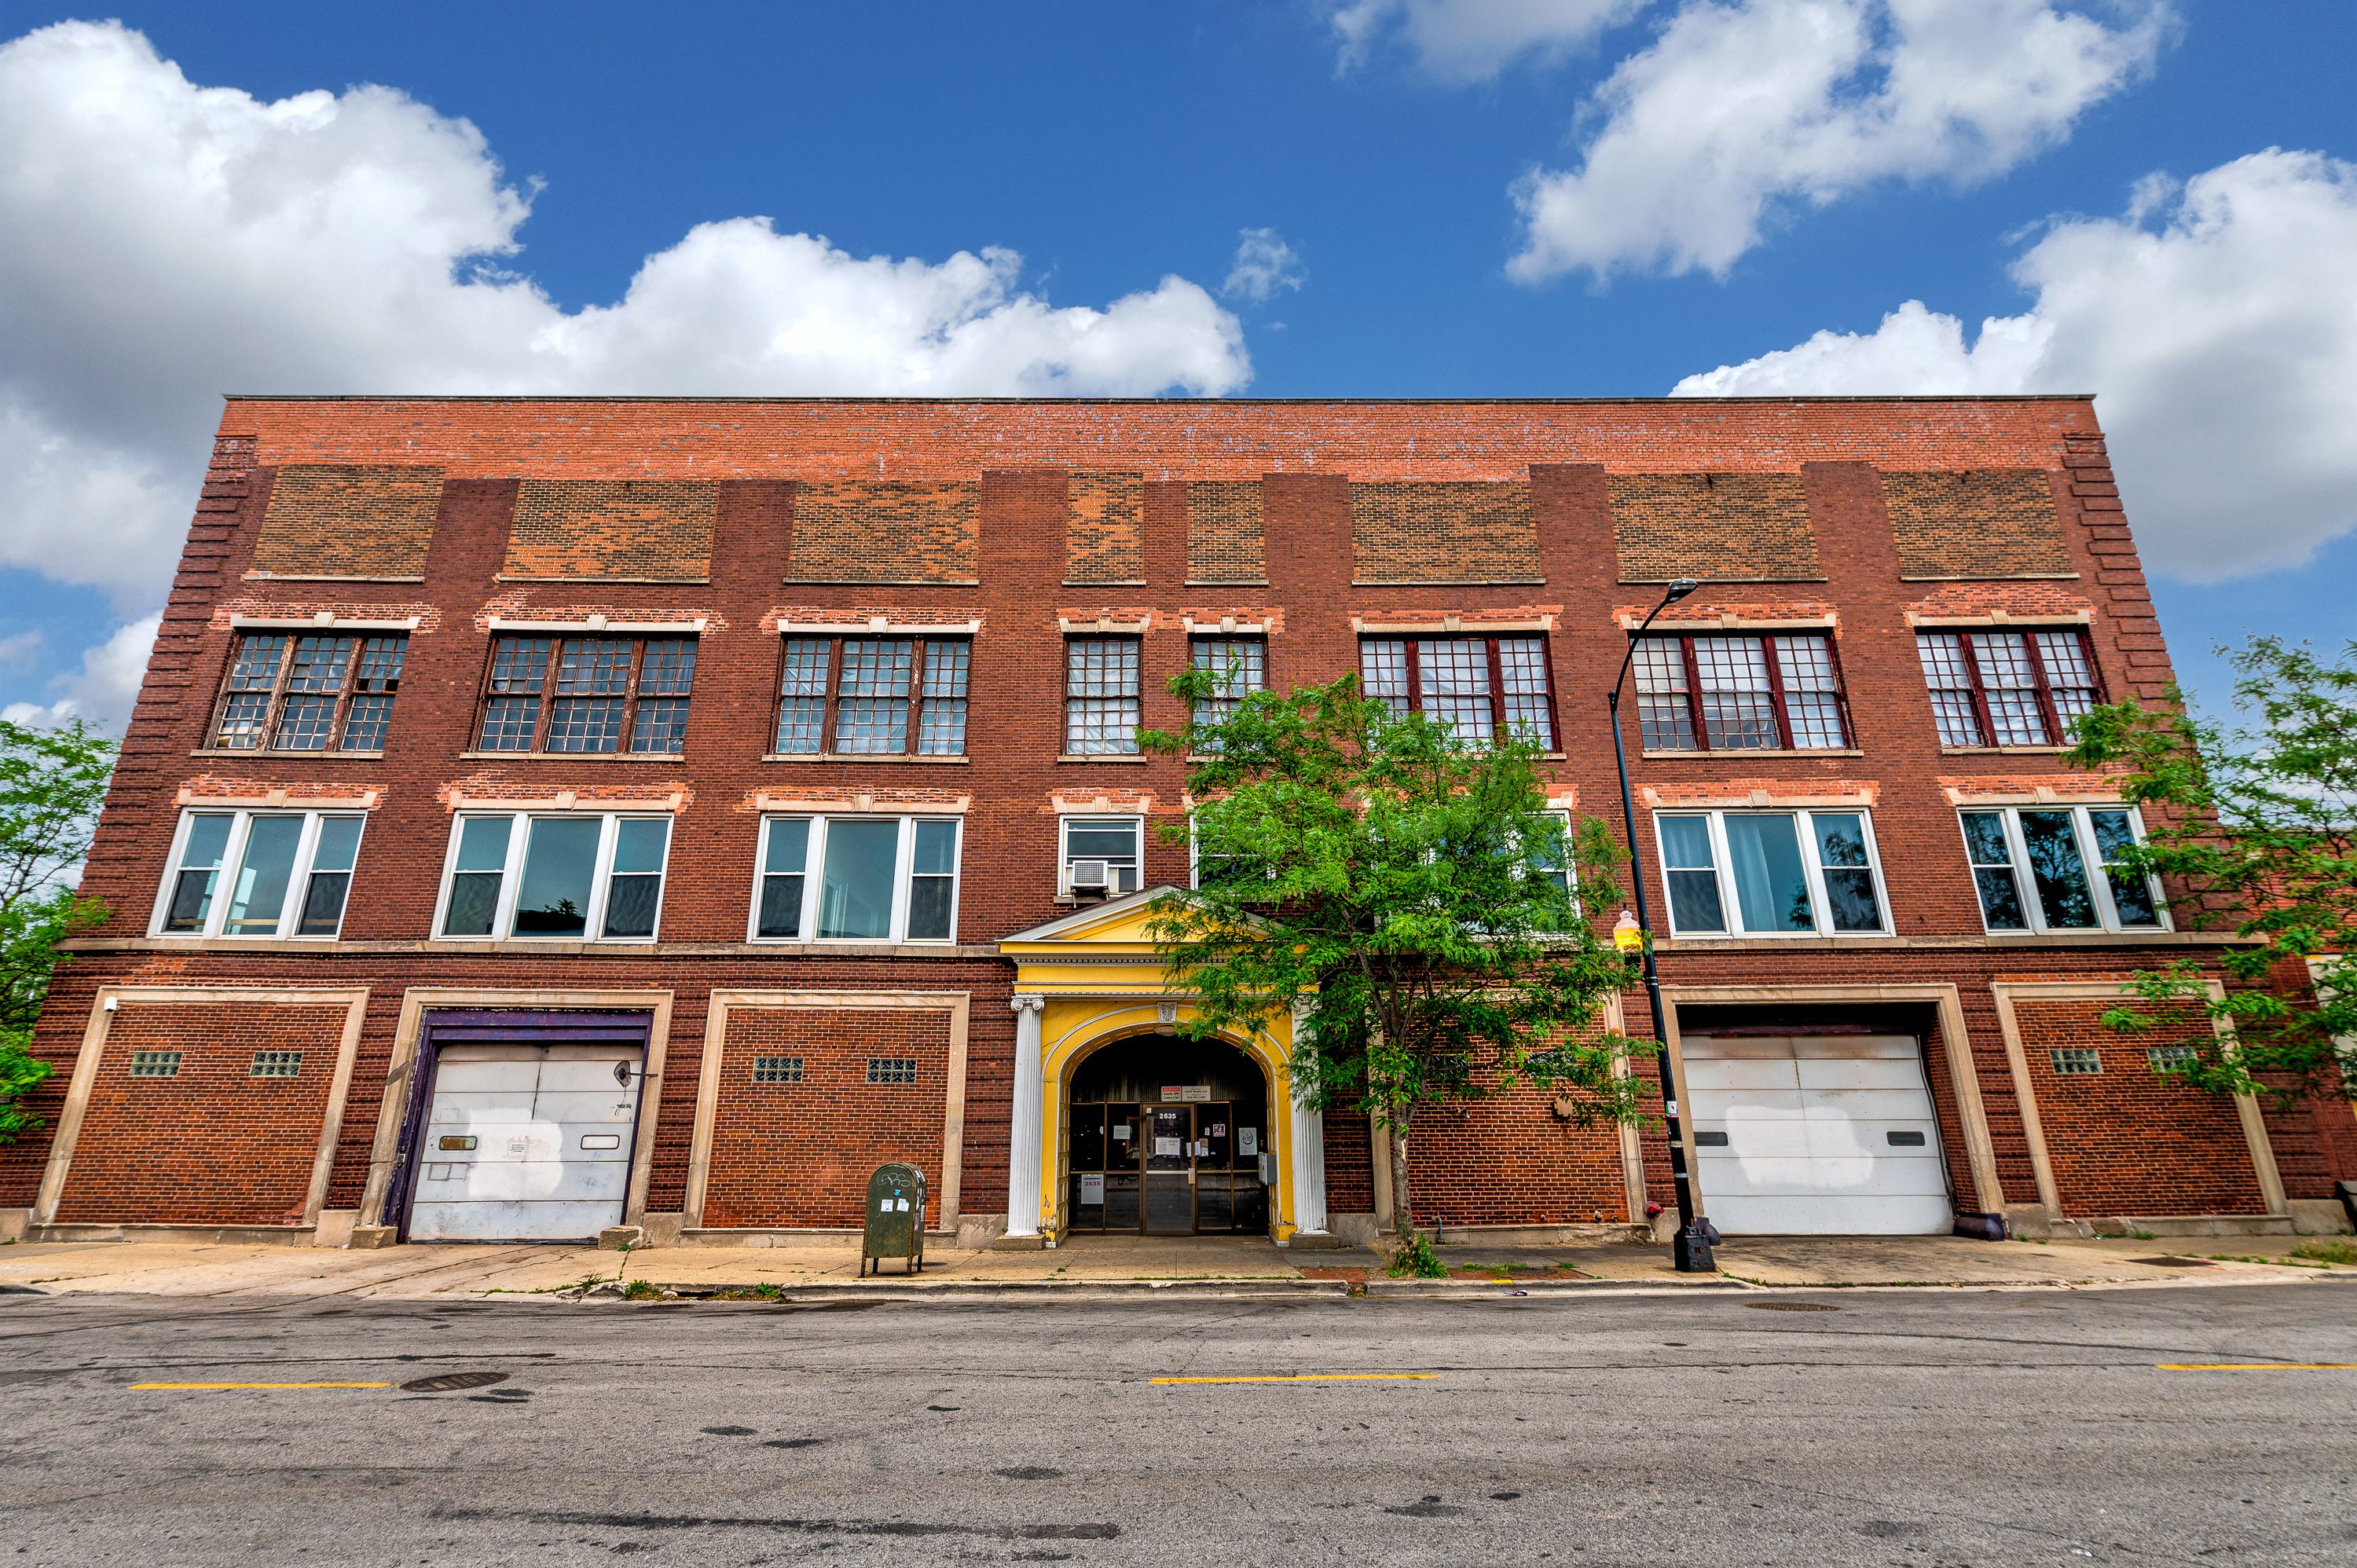 Industrial / Redevelopment Opportunity